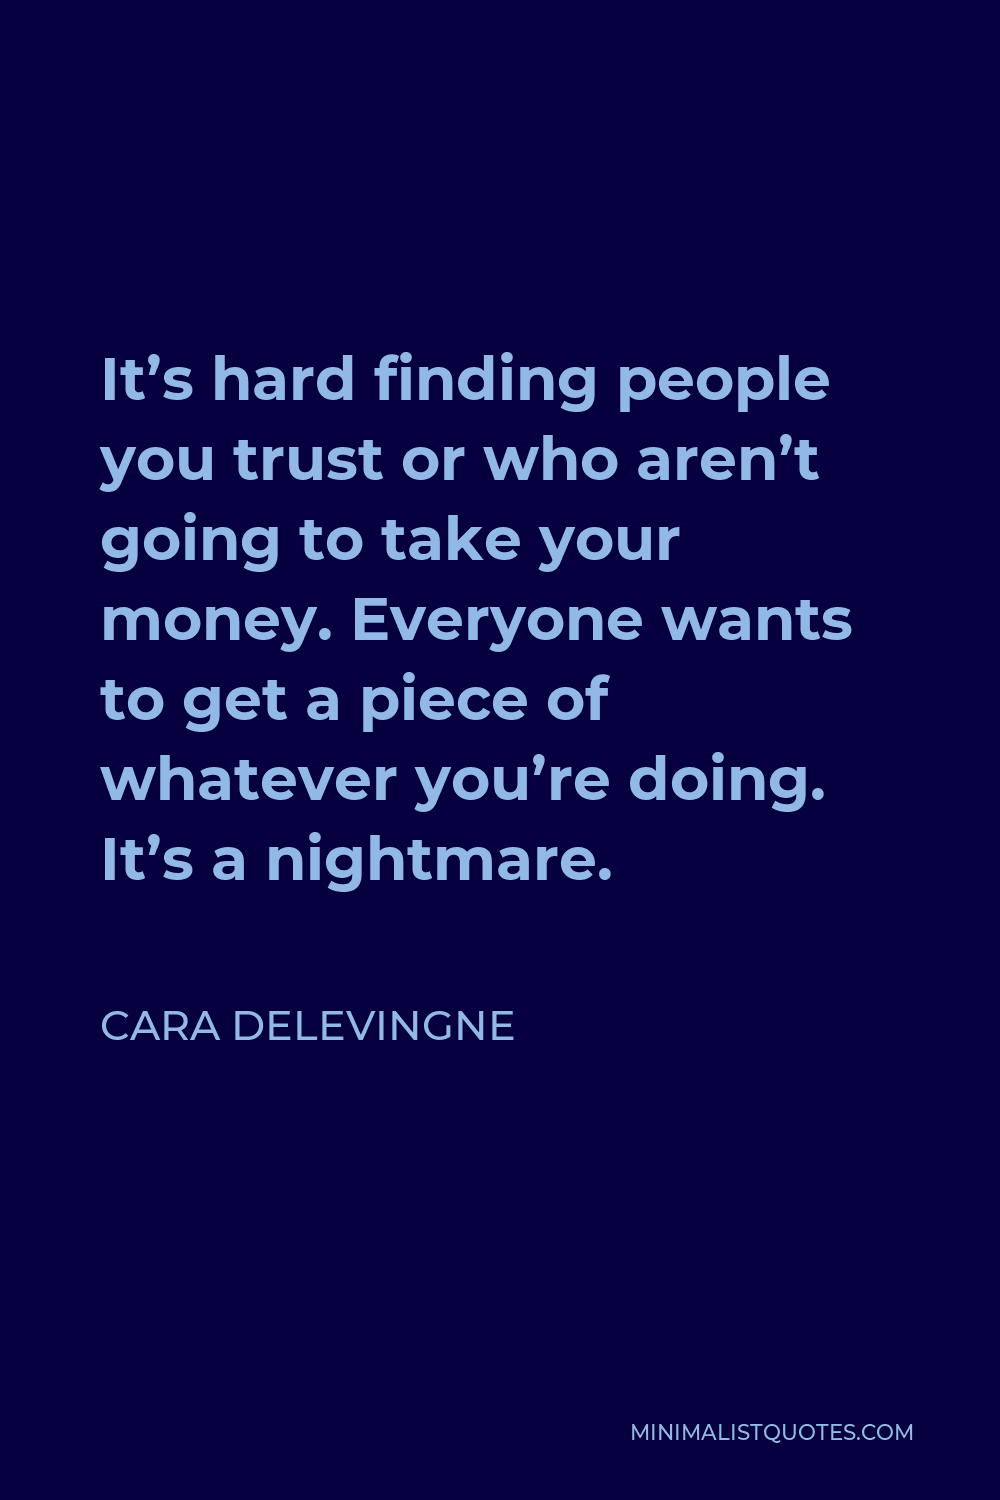 Cara Delevingne Quote - It’s hard finding people you trust or who aren’t going to take your money. Everyone wants to get a piece of whatever you’re doing. It’s a nightmare.